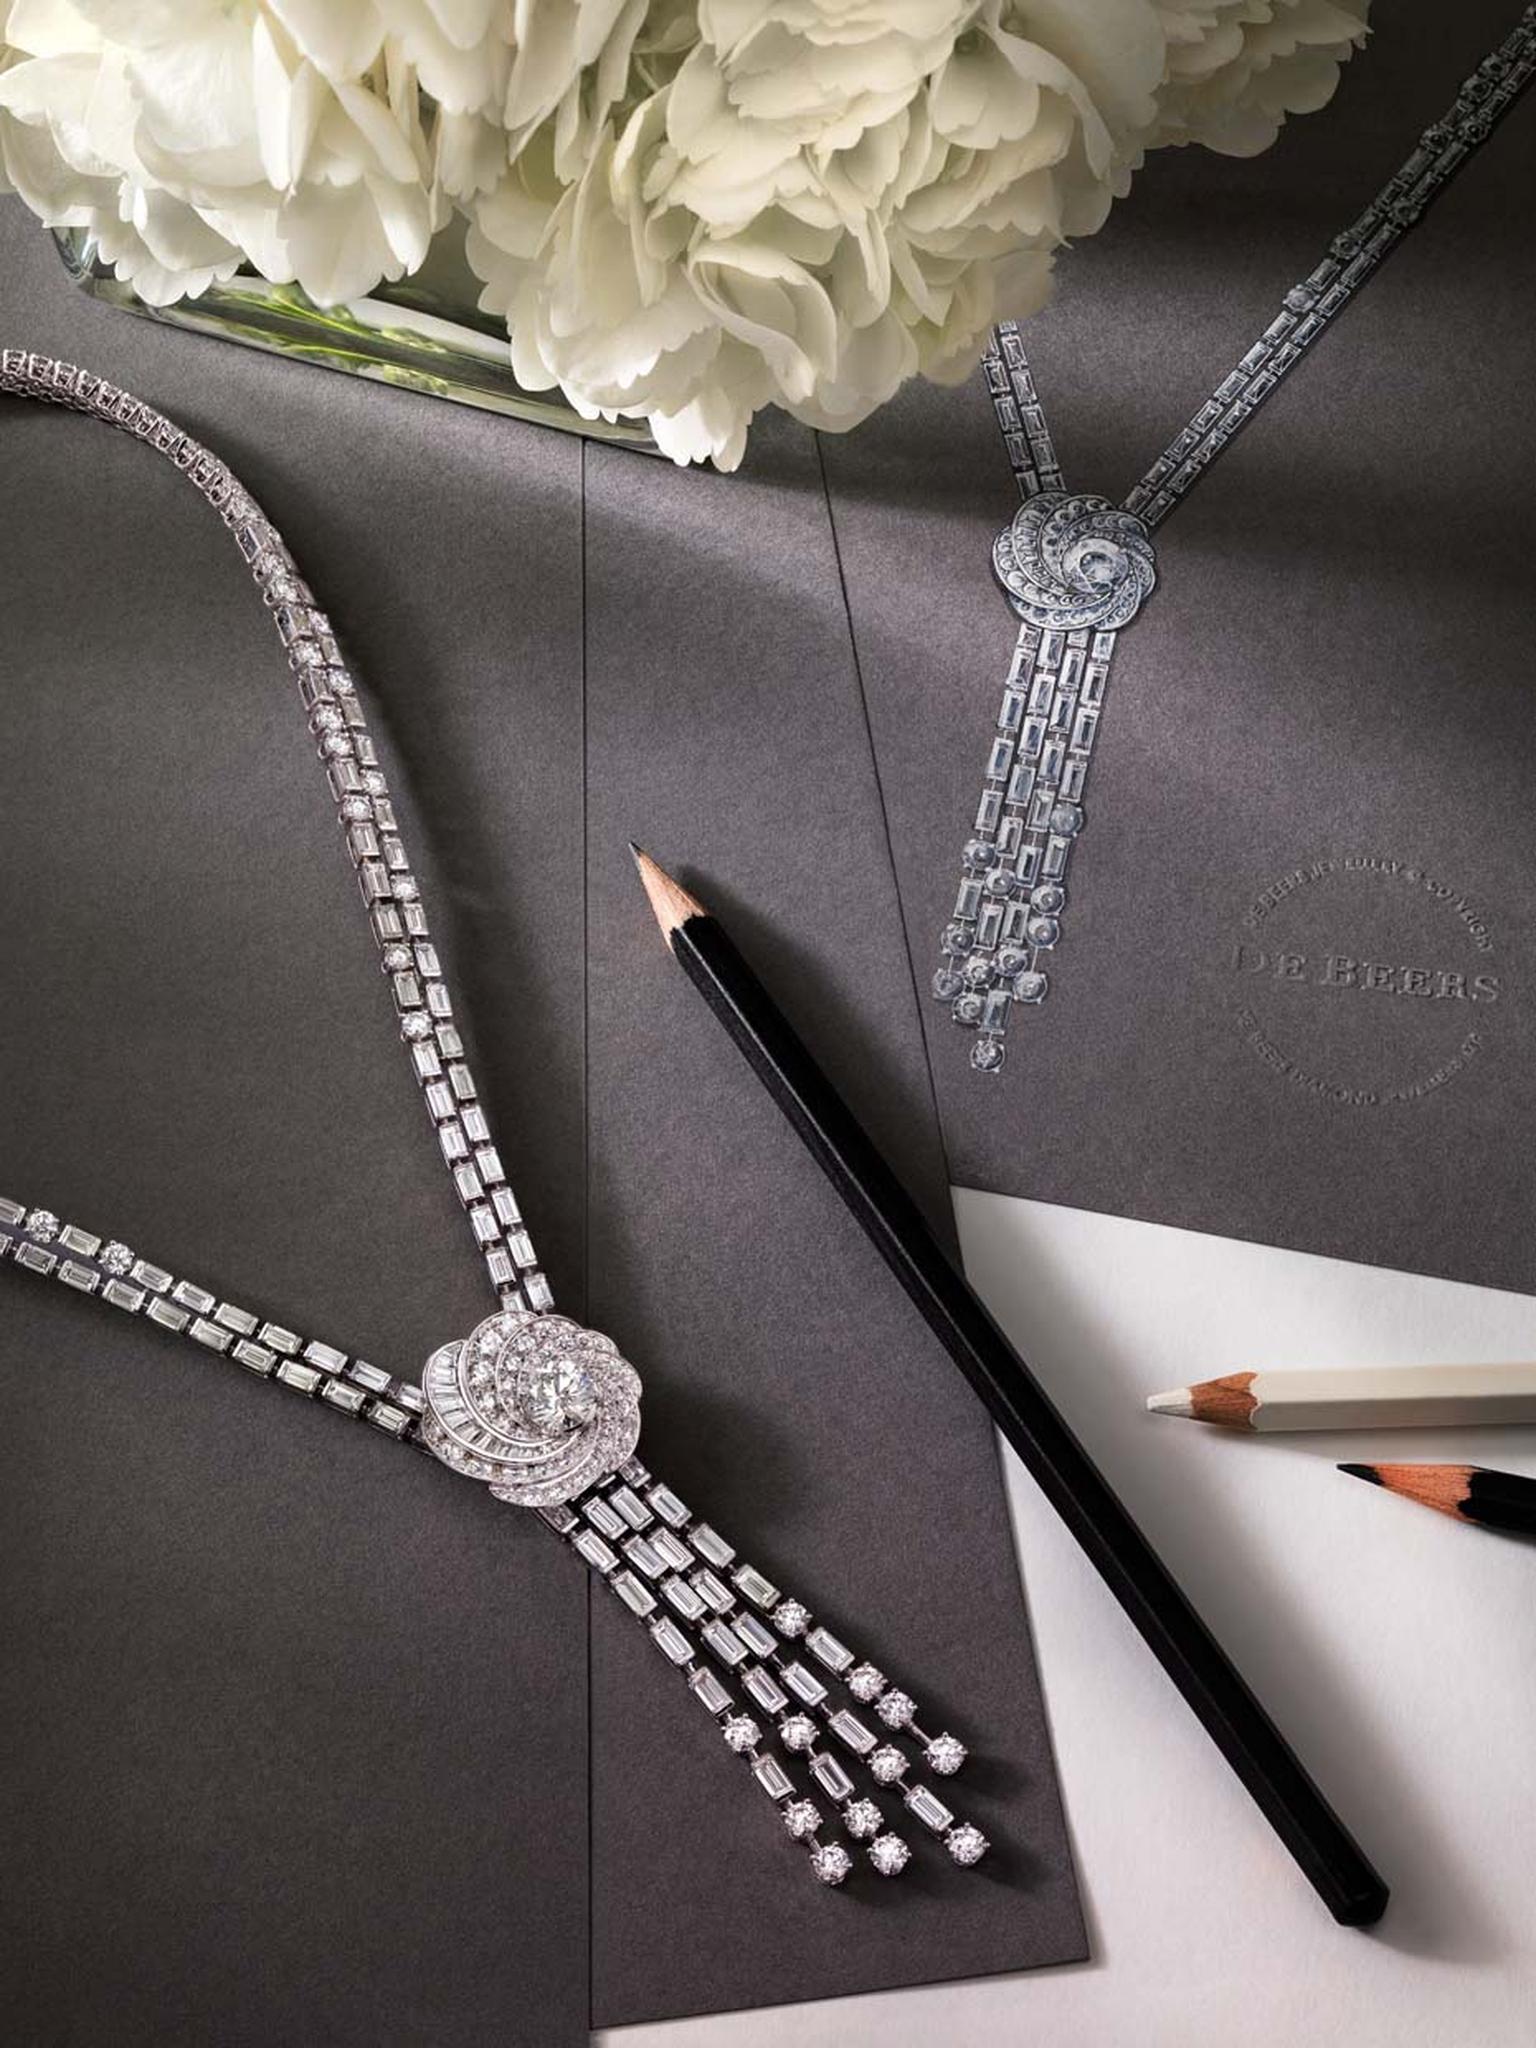 With the new Aria diamond jewellery collection, which includes this high jewellery necklace, De Beers encircles the central diamond with a series of swirling, spiraling ribbons.